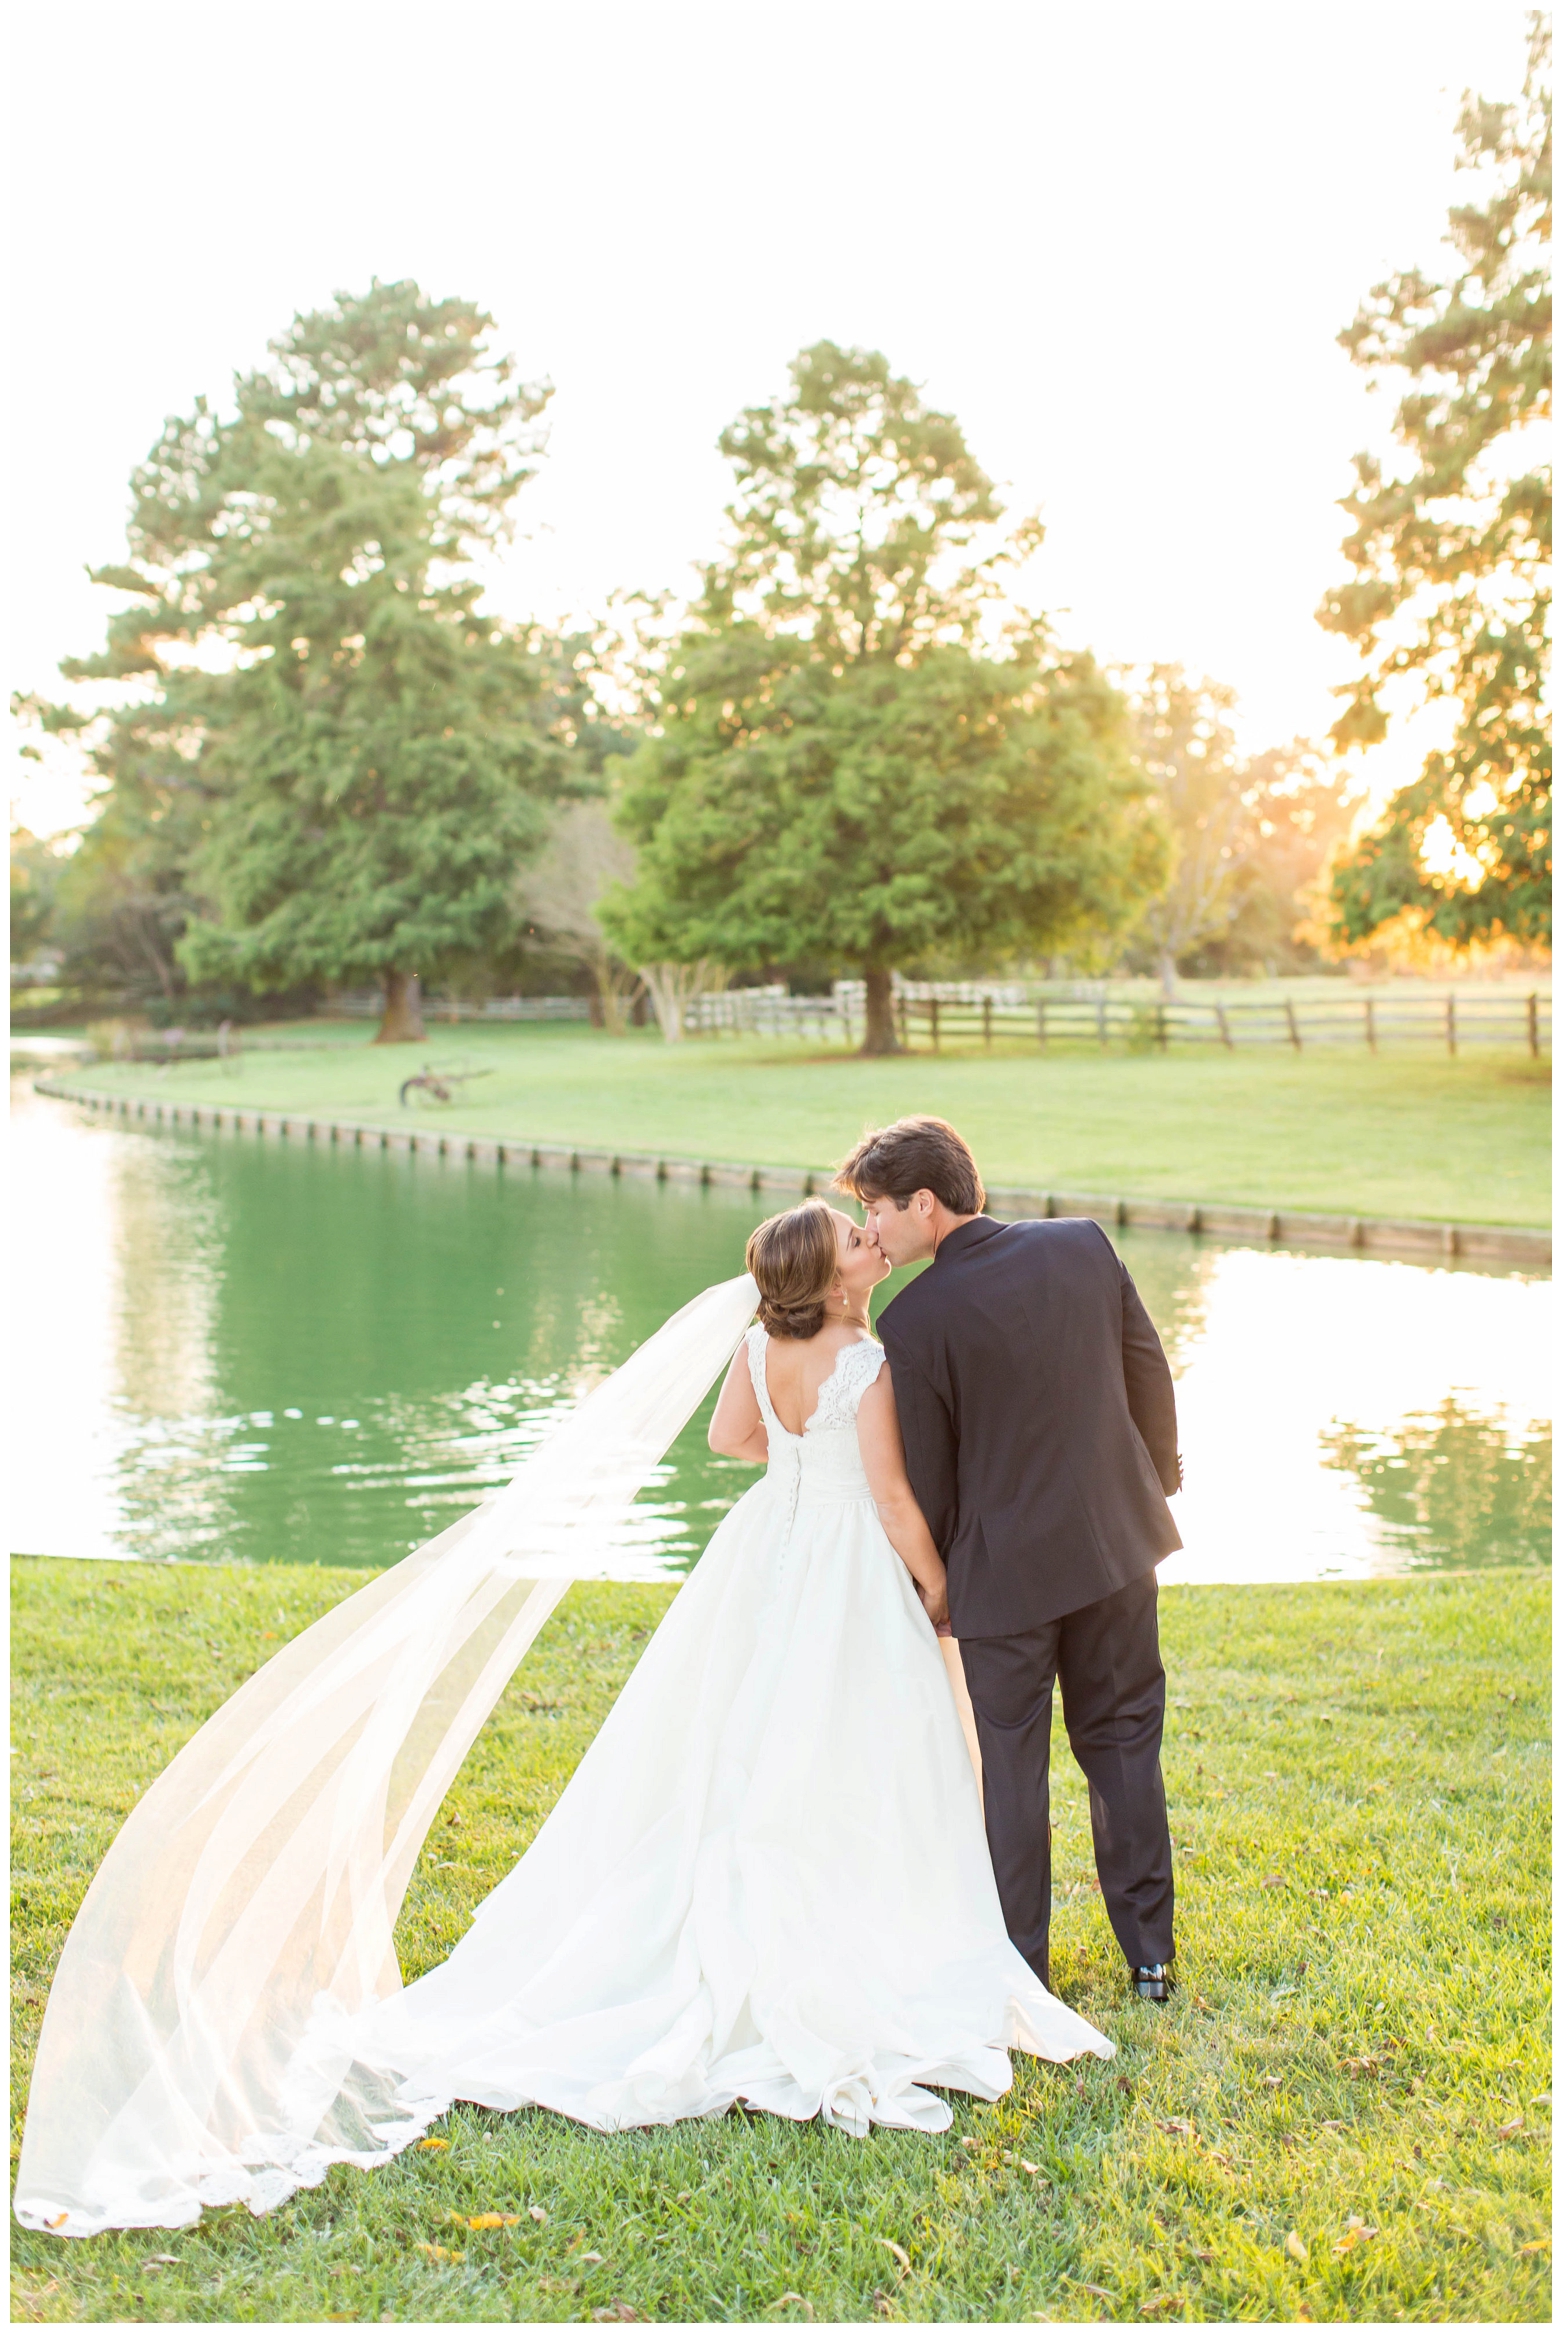 View More: http://hopetaylorphotographyphotos.pass.us/kelley-and-perry-wedding